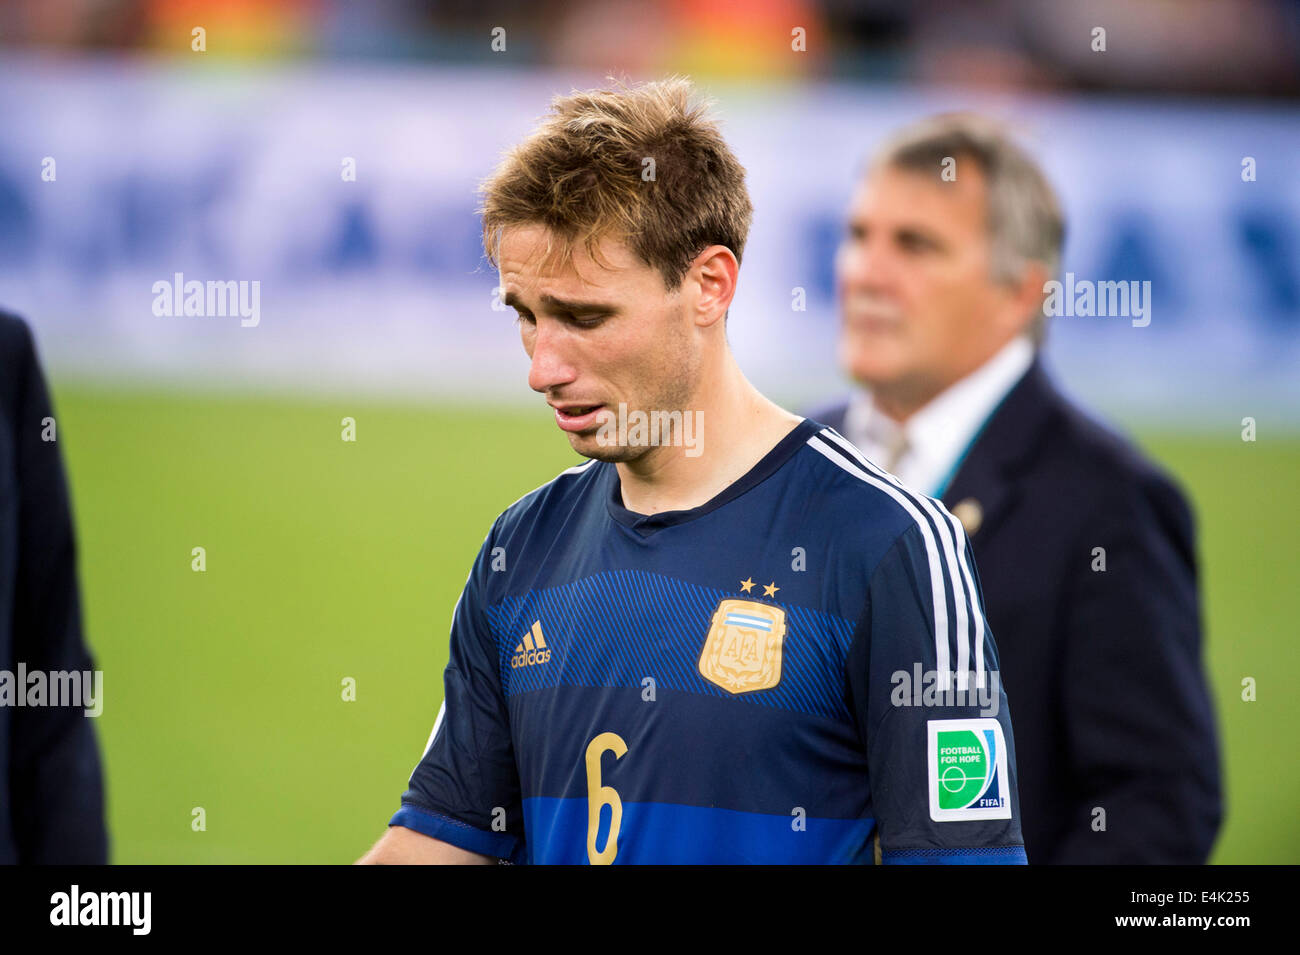 Rio de Janeiro, Brazil. 13th July, 2014. Lucas Biglia (ARG) Football/Soccer : Lucas Biglia of Argentina looks dejected after the FIFA World Cup Brazil 2014 Final match between Germany 1-0 Argentina at the Maracana stadium in Rio de Janeiro, Brazil . Credit:  Maurizio Borsari/AFLO/Alamy Live News Stock Photo